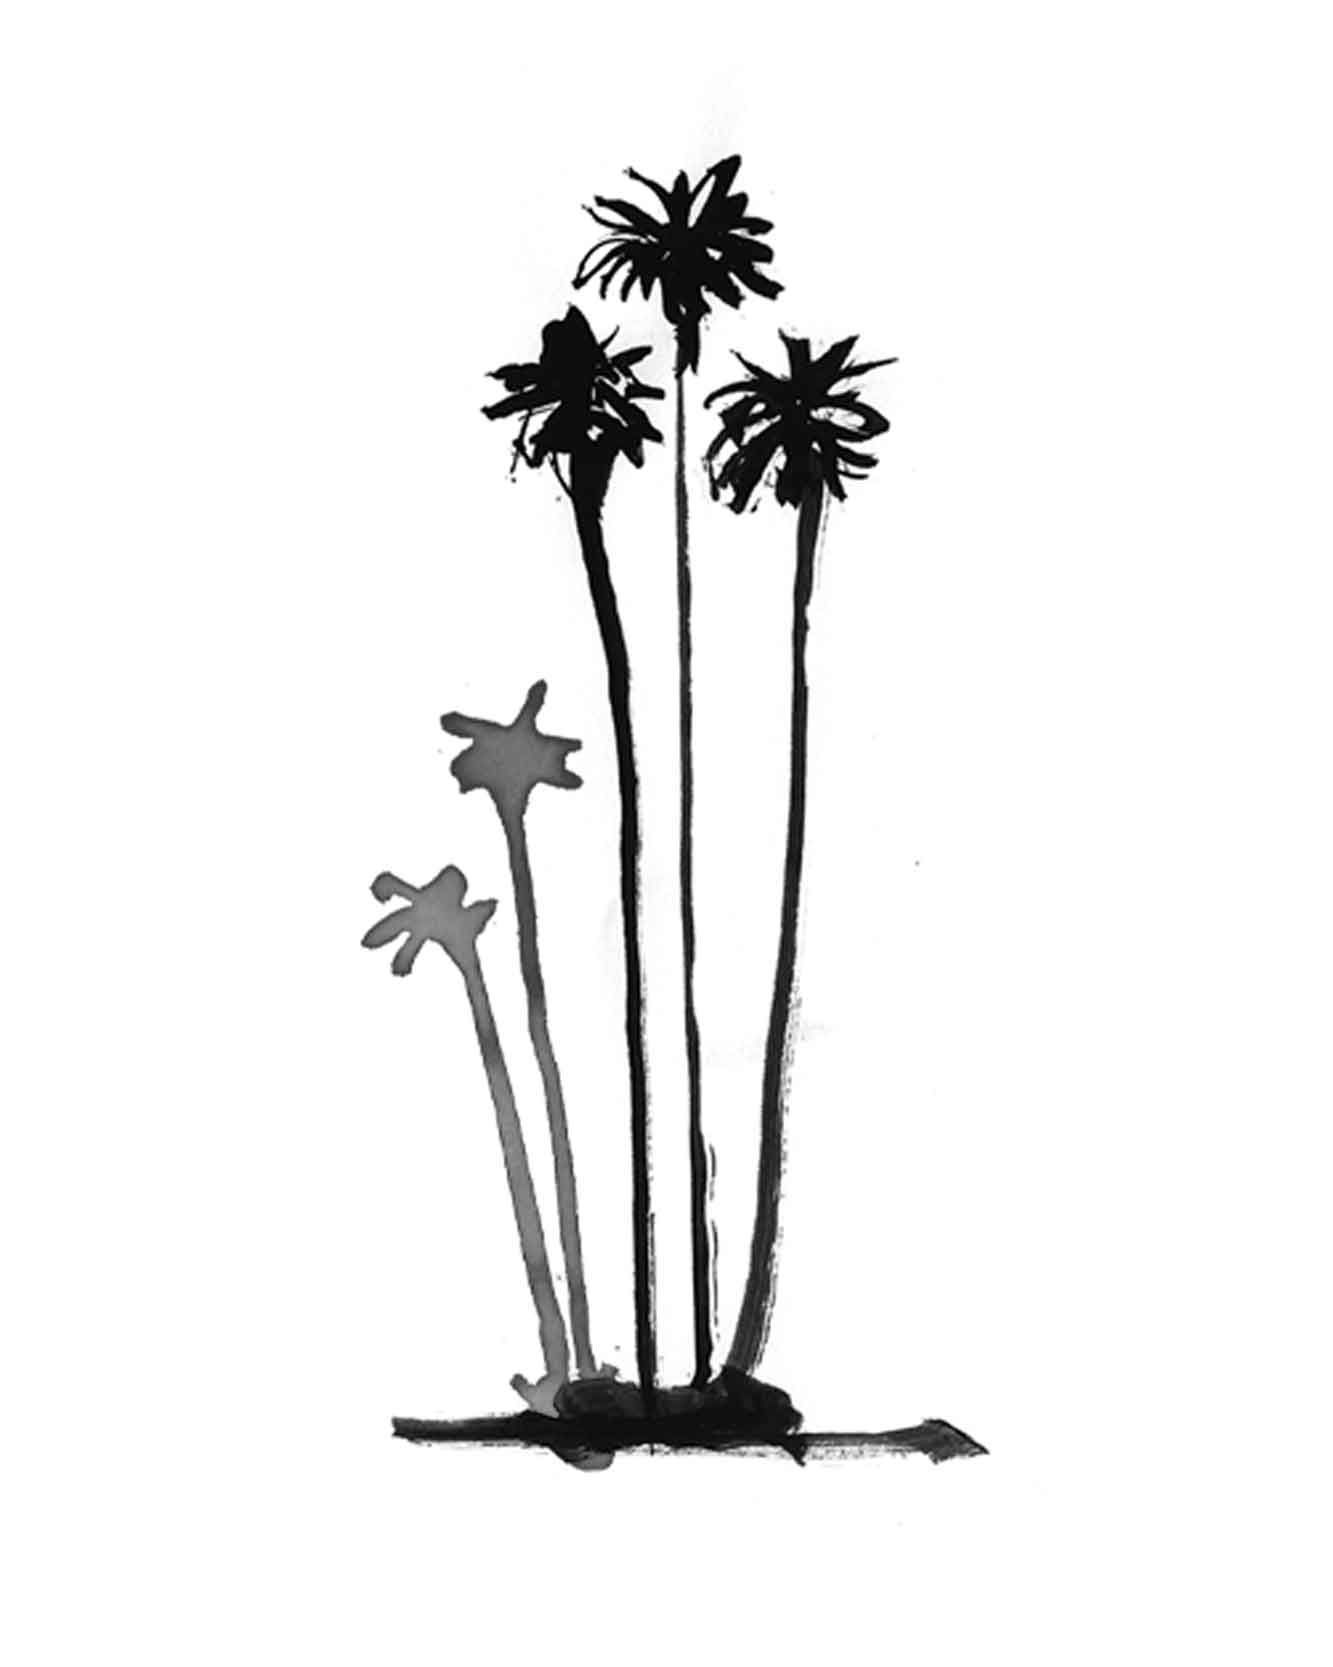 Palm tree gif illustration as part of a series of Travel inspired Illustrated Maps for Palm Springs Life Magazine Incorporating my inky hand written lettering, and drawings of landmarks and areas of interest.